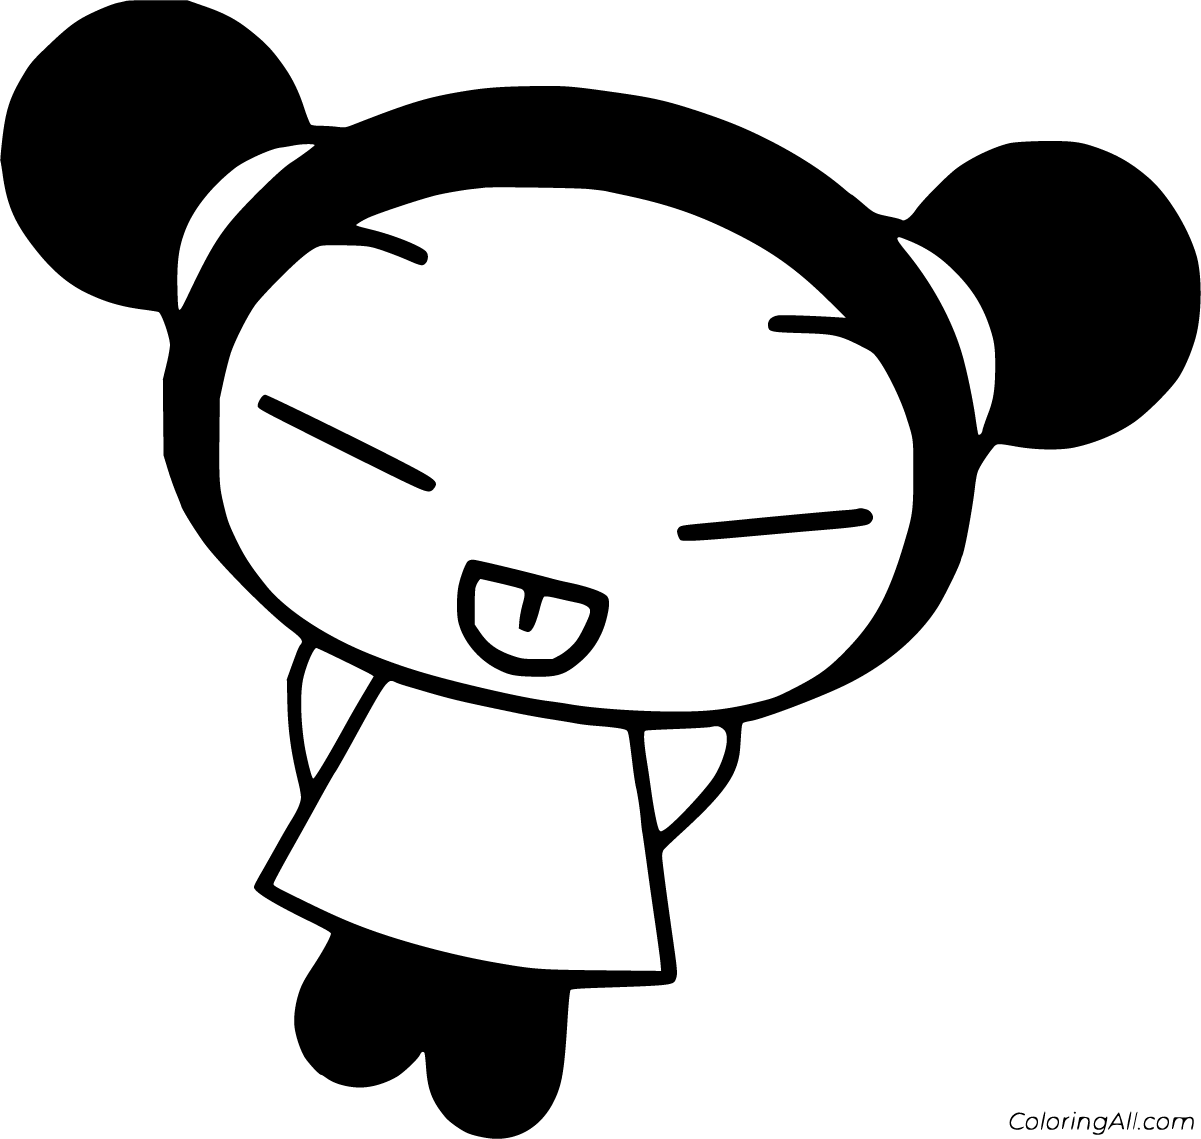 Pucca Coloring Pages - ColoringAll